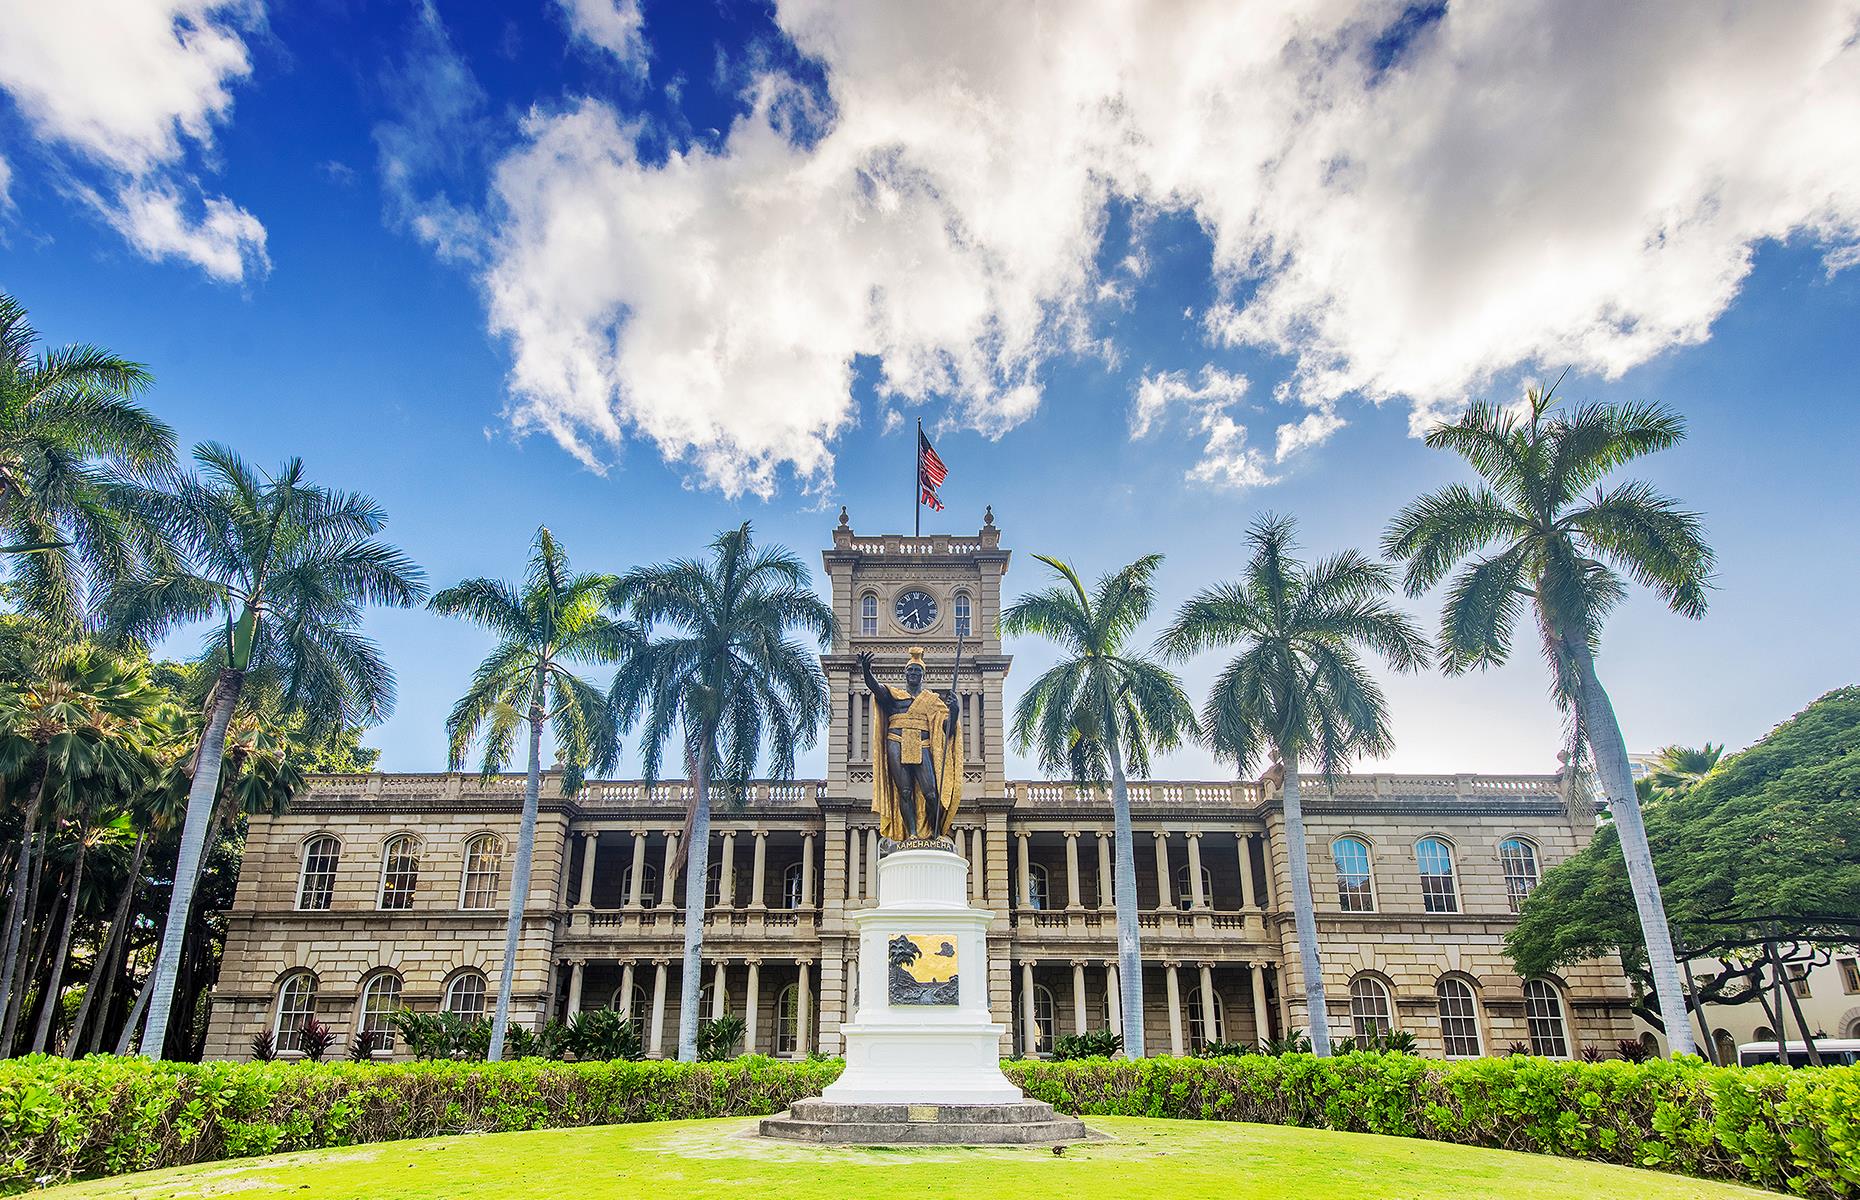 <p>Fancy royal palaces are few and far between in the States, but <a href="https://www.iolanipalace.org/">Iolani Palace</a> is a truly regal pile, once home to King Kalakaua and Queen Kapiolani, among others. And, if that wasn't enough, it's reportedly got a few ghostly residents to boot. Guards and guests of the royal palace have reported sightings of Hawaii's last sovereign monarch, Queen Liliuokalani, floating about the grounds and gazing out from palace windows.</p>  <p><a href="https://www.loveexploring.com/galleries/112118/abandoned-palaces-rebuilt-before-your-eyes?page=1"><strong>These abandoned palaces are rebuilt before your eyes</strong></a></p>